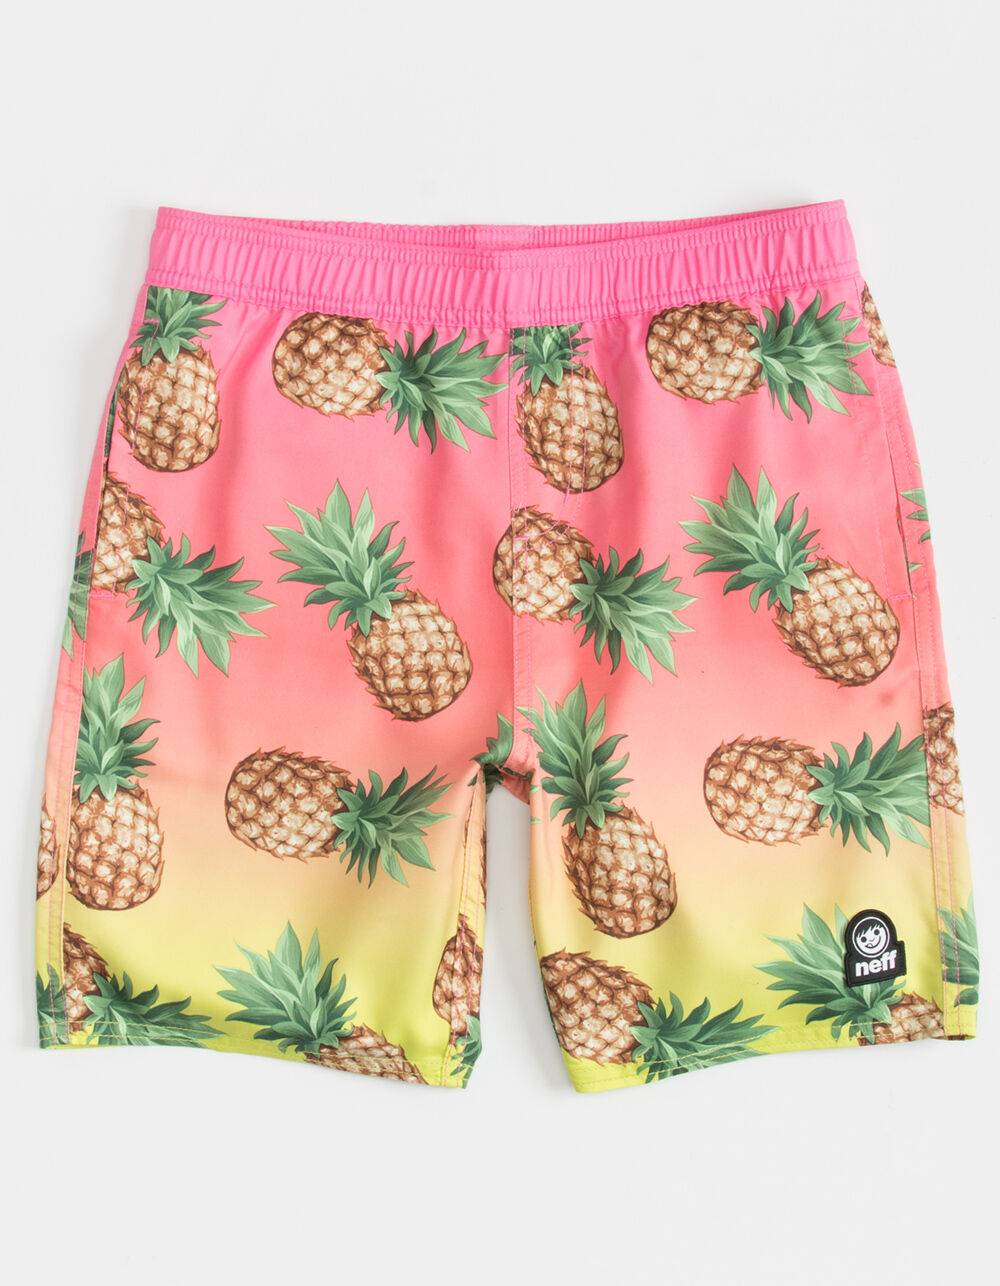 NEFF Pineapple Boys Volley Shorts - PINK COMBO | Tillys